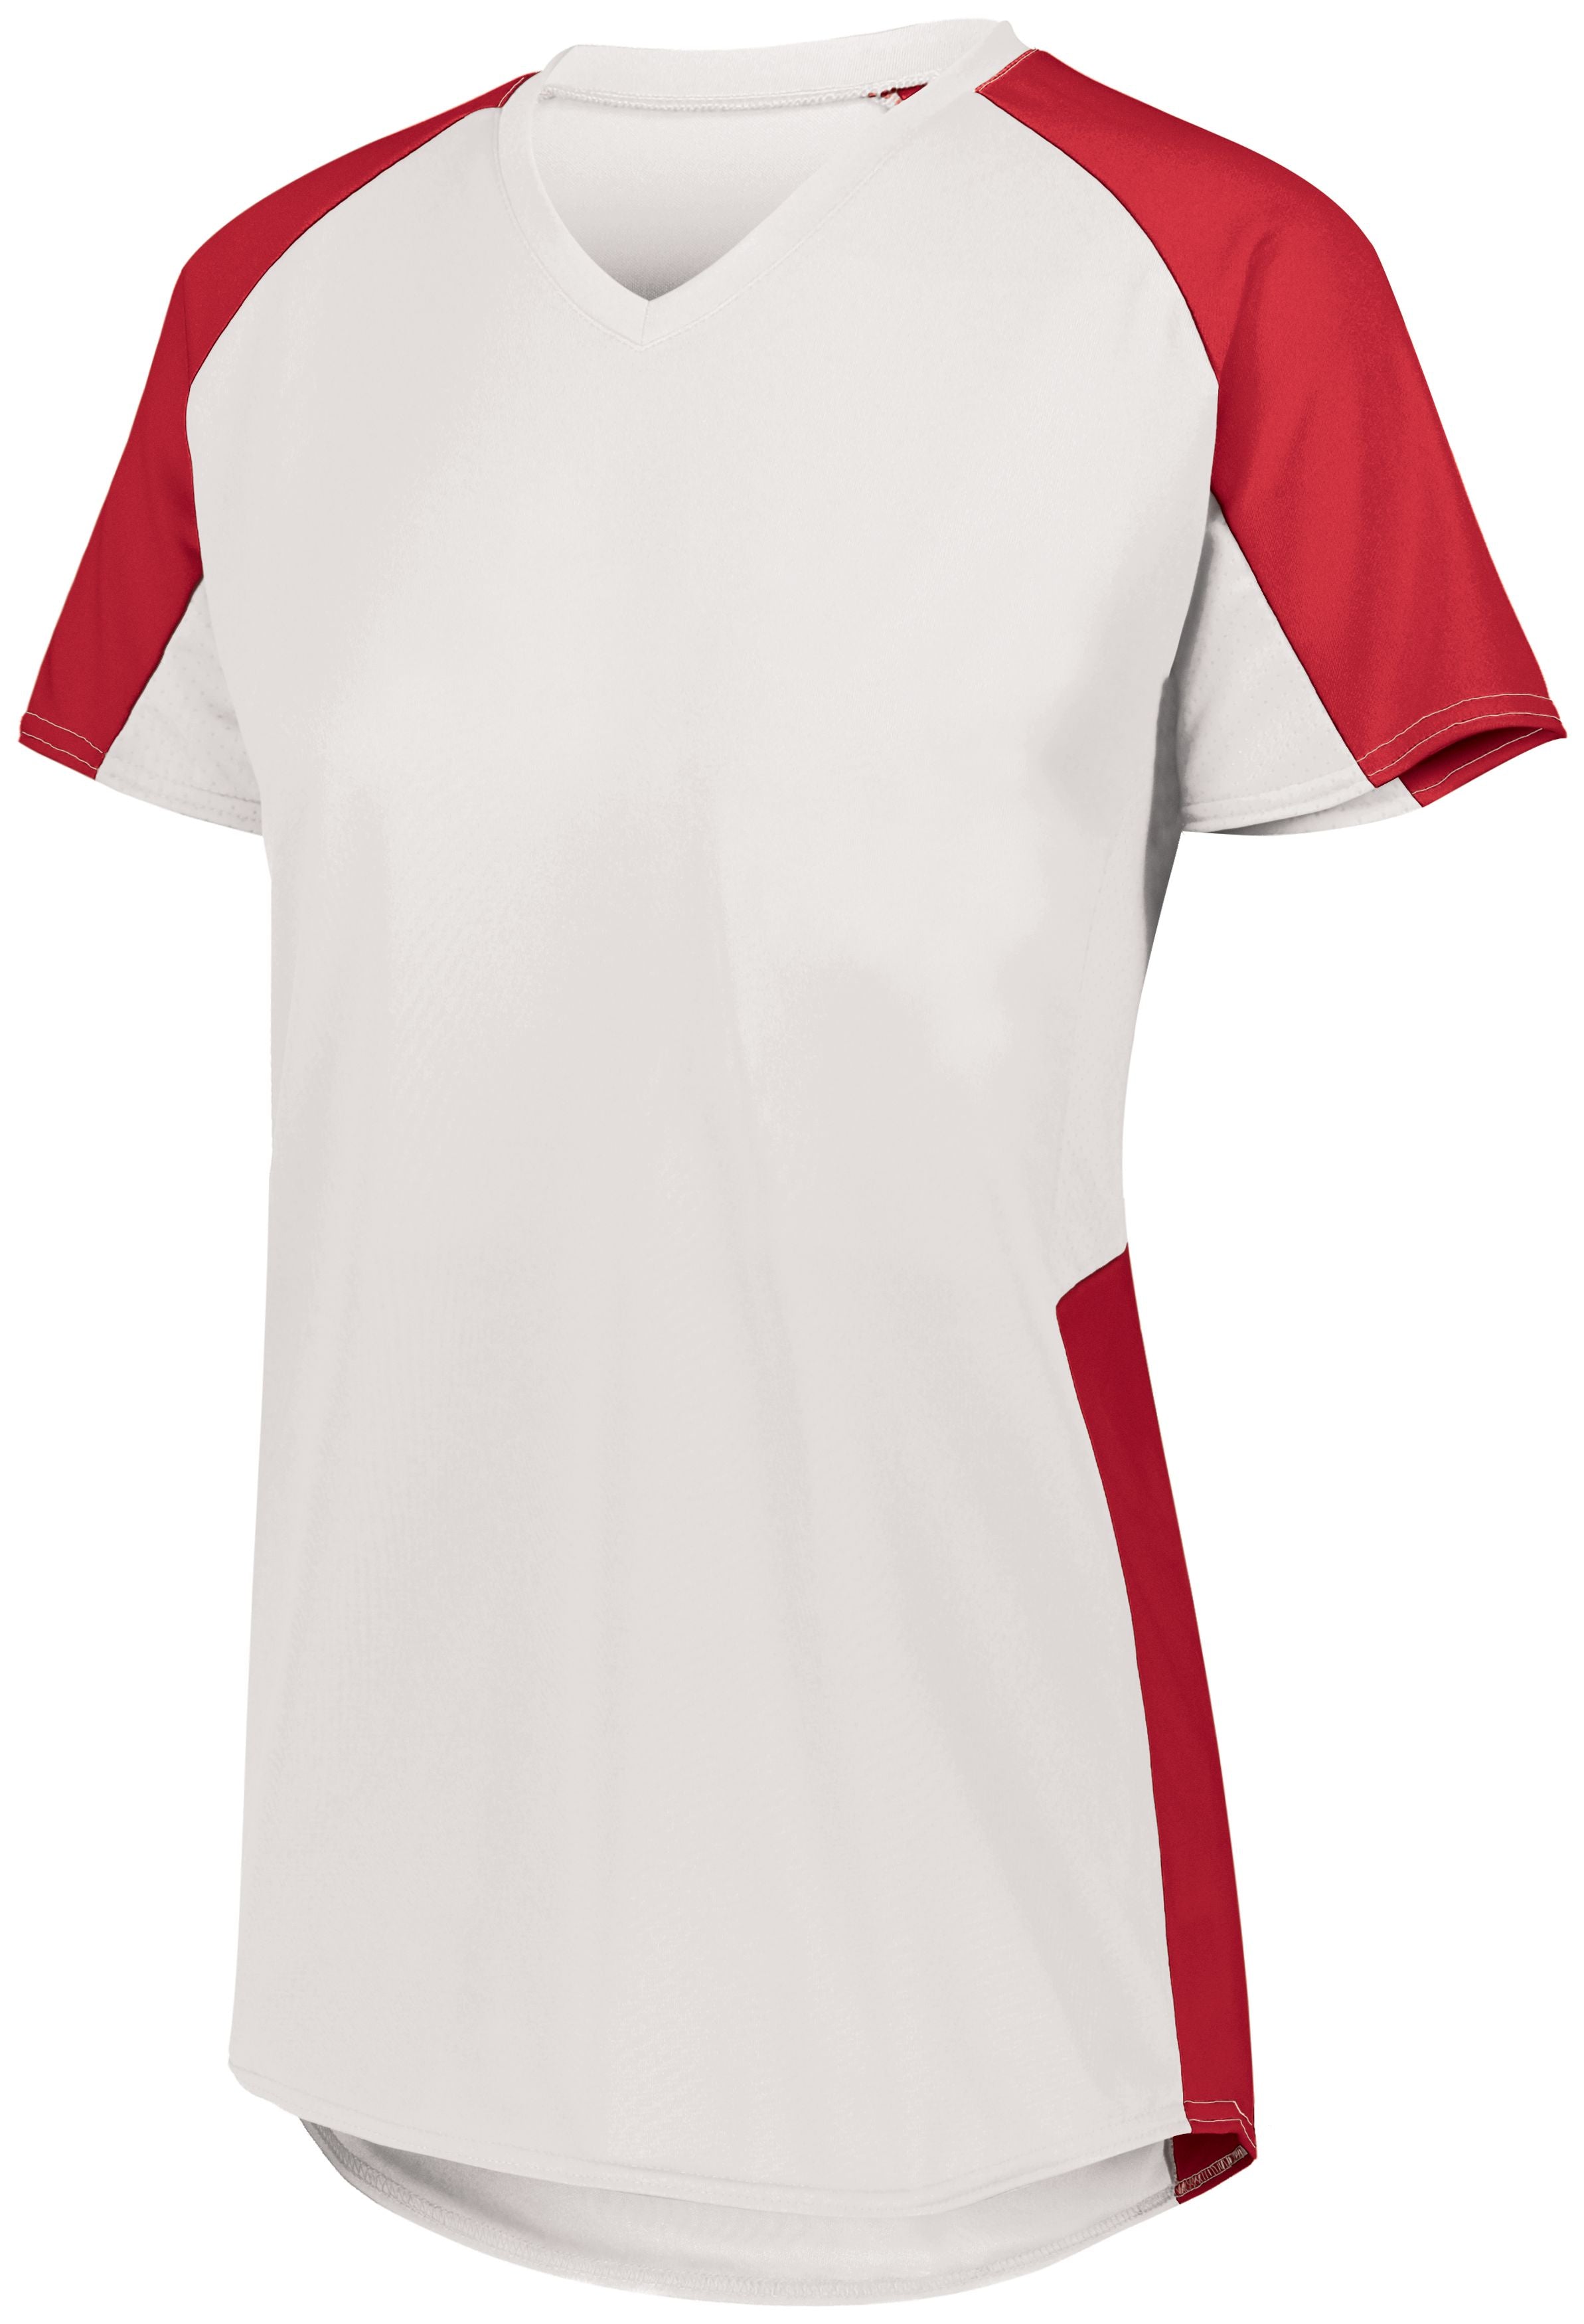 Augusta Sportswear Girls Cutter Jersey in White/Red  -Part of the Girls, Augusta-Products, Softball, Girls-Jersey, Shirts product lines at KanaleyCreations.com